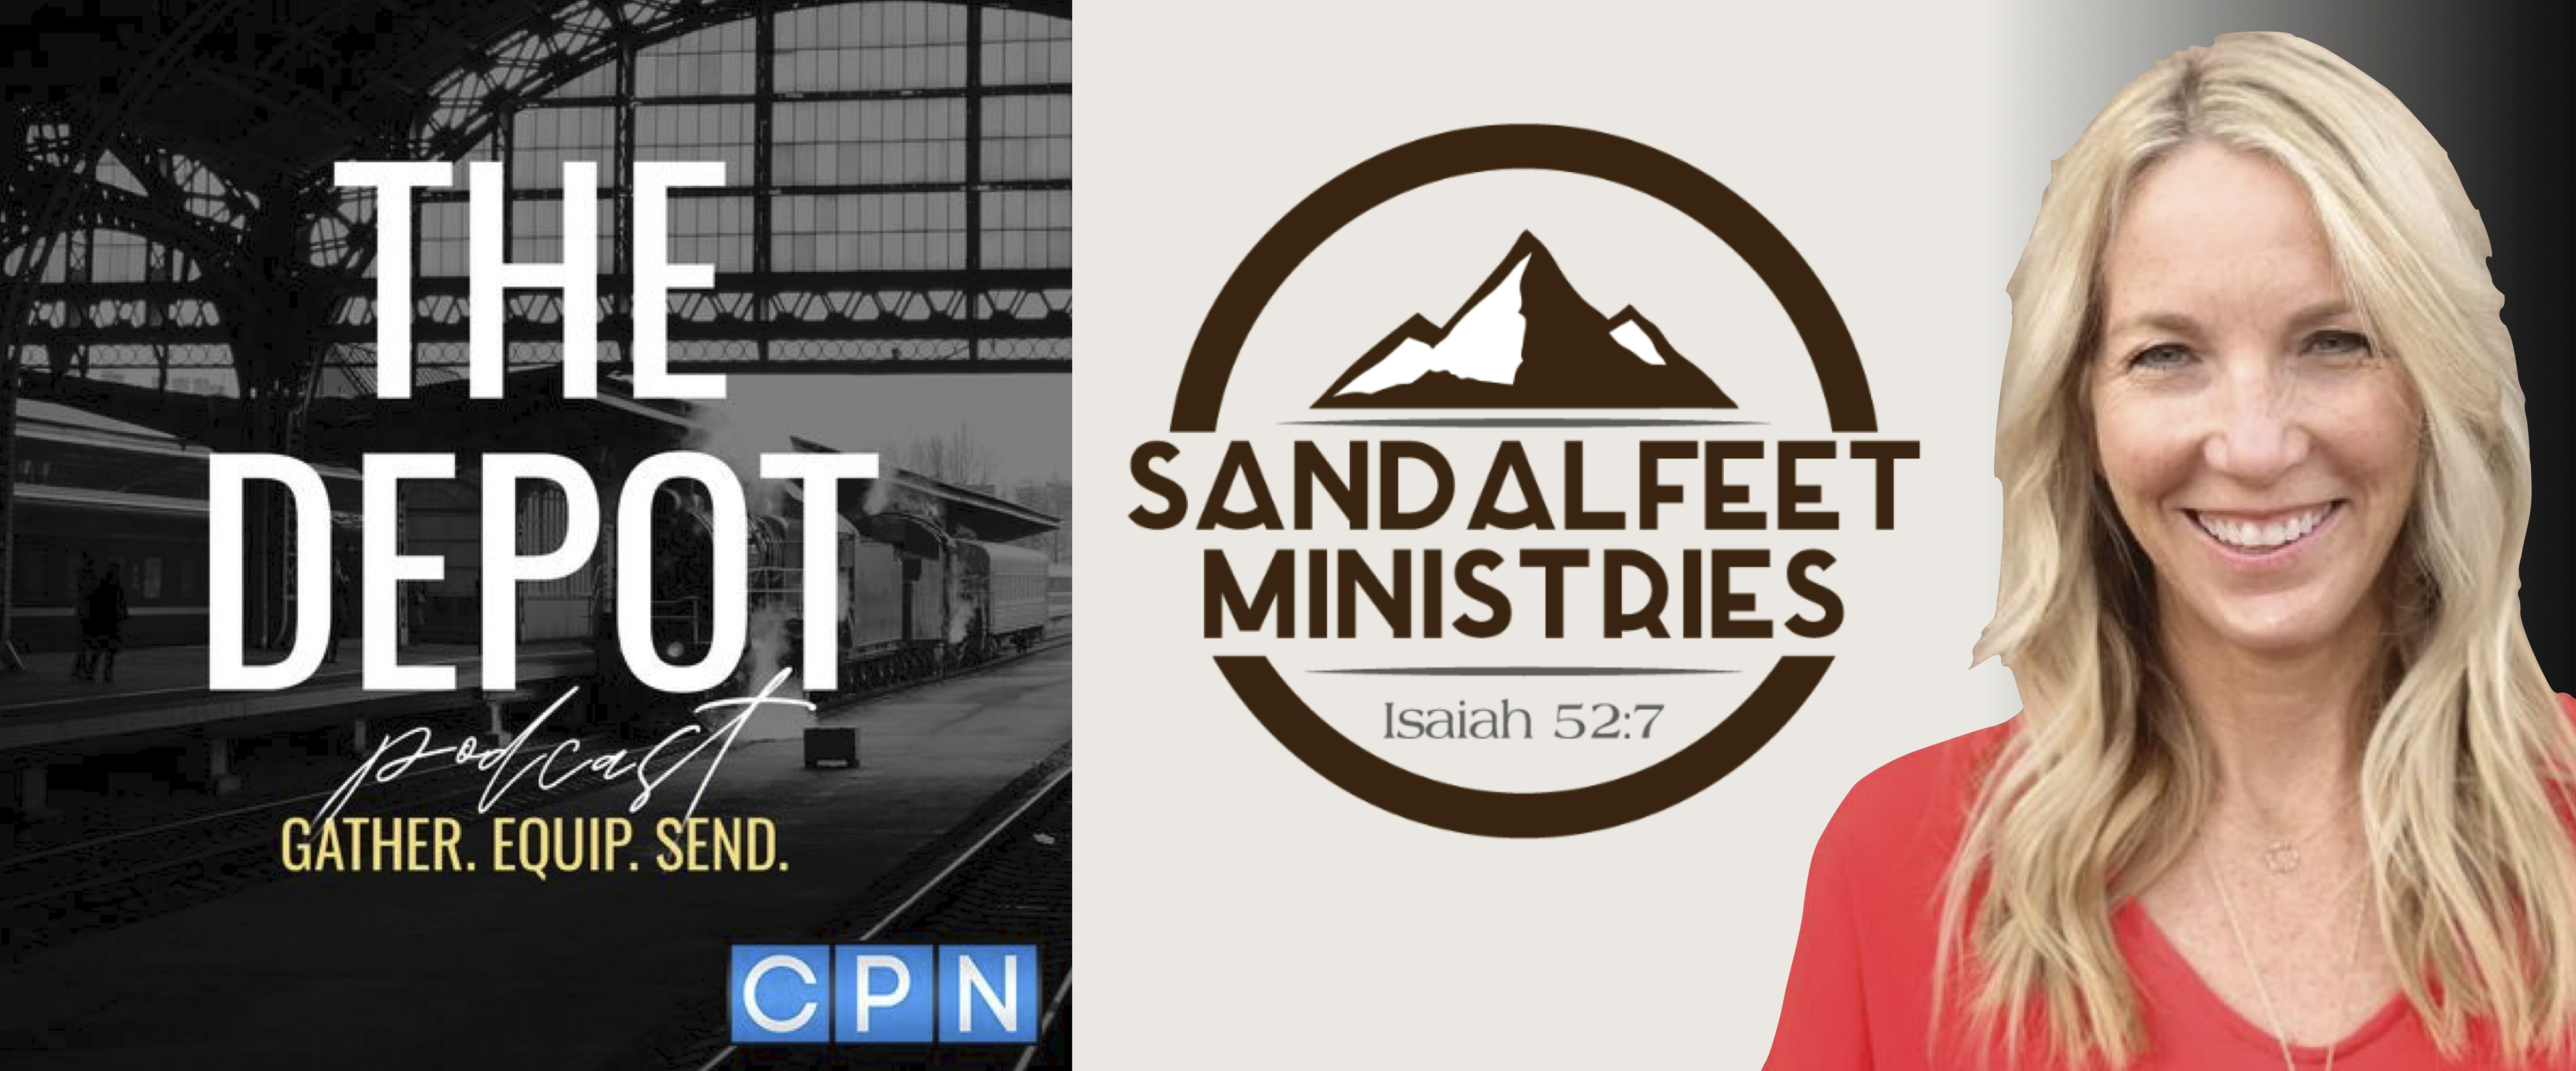 THE DEPOT PODCAST: Progressive Christianity - Is It Our Garden Moment?